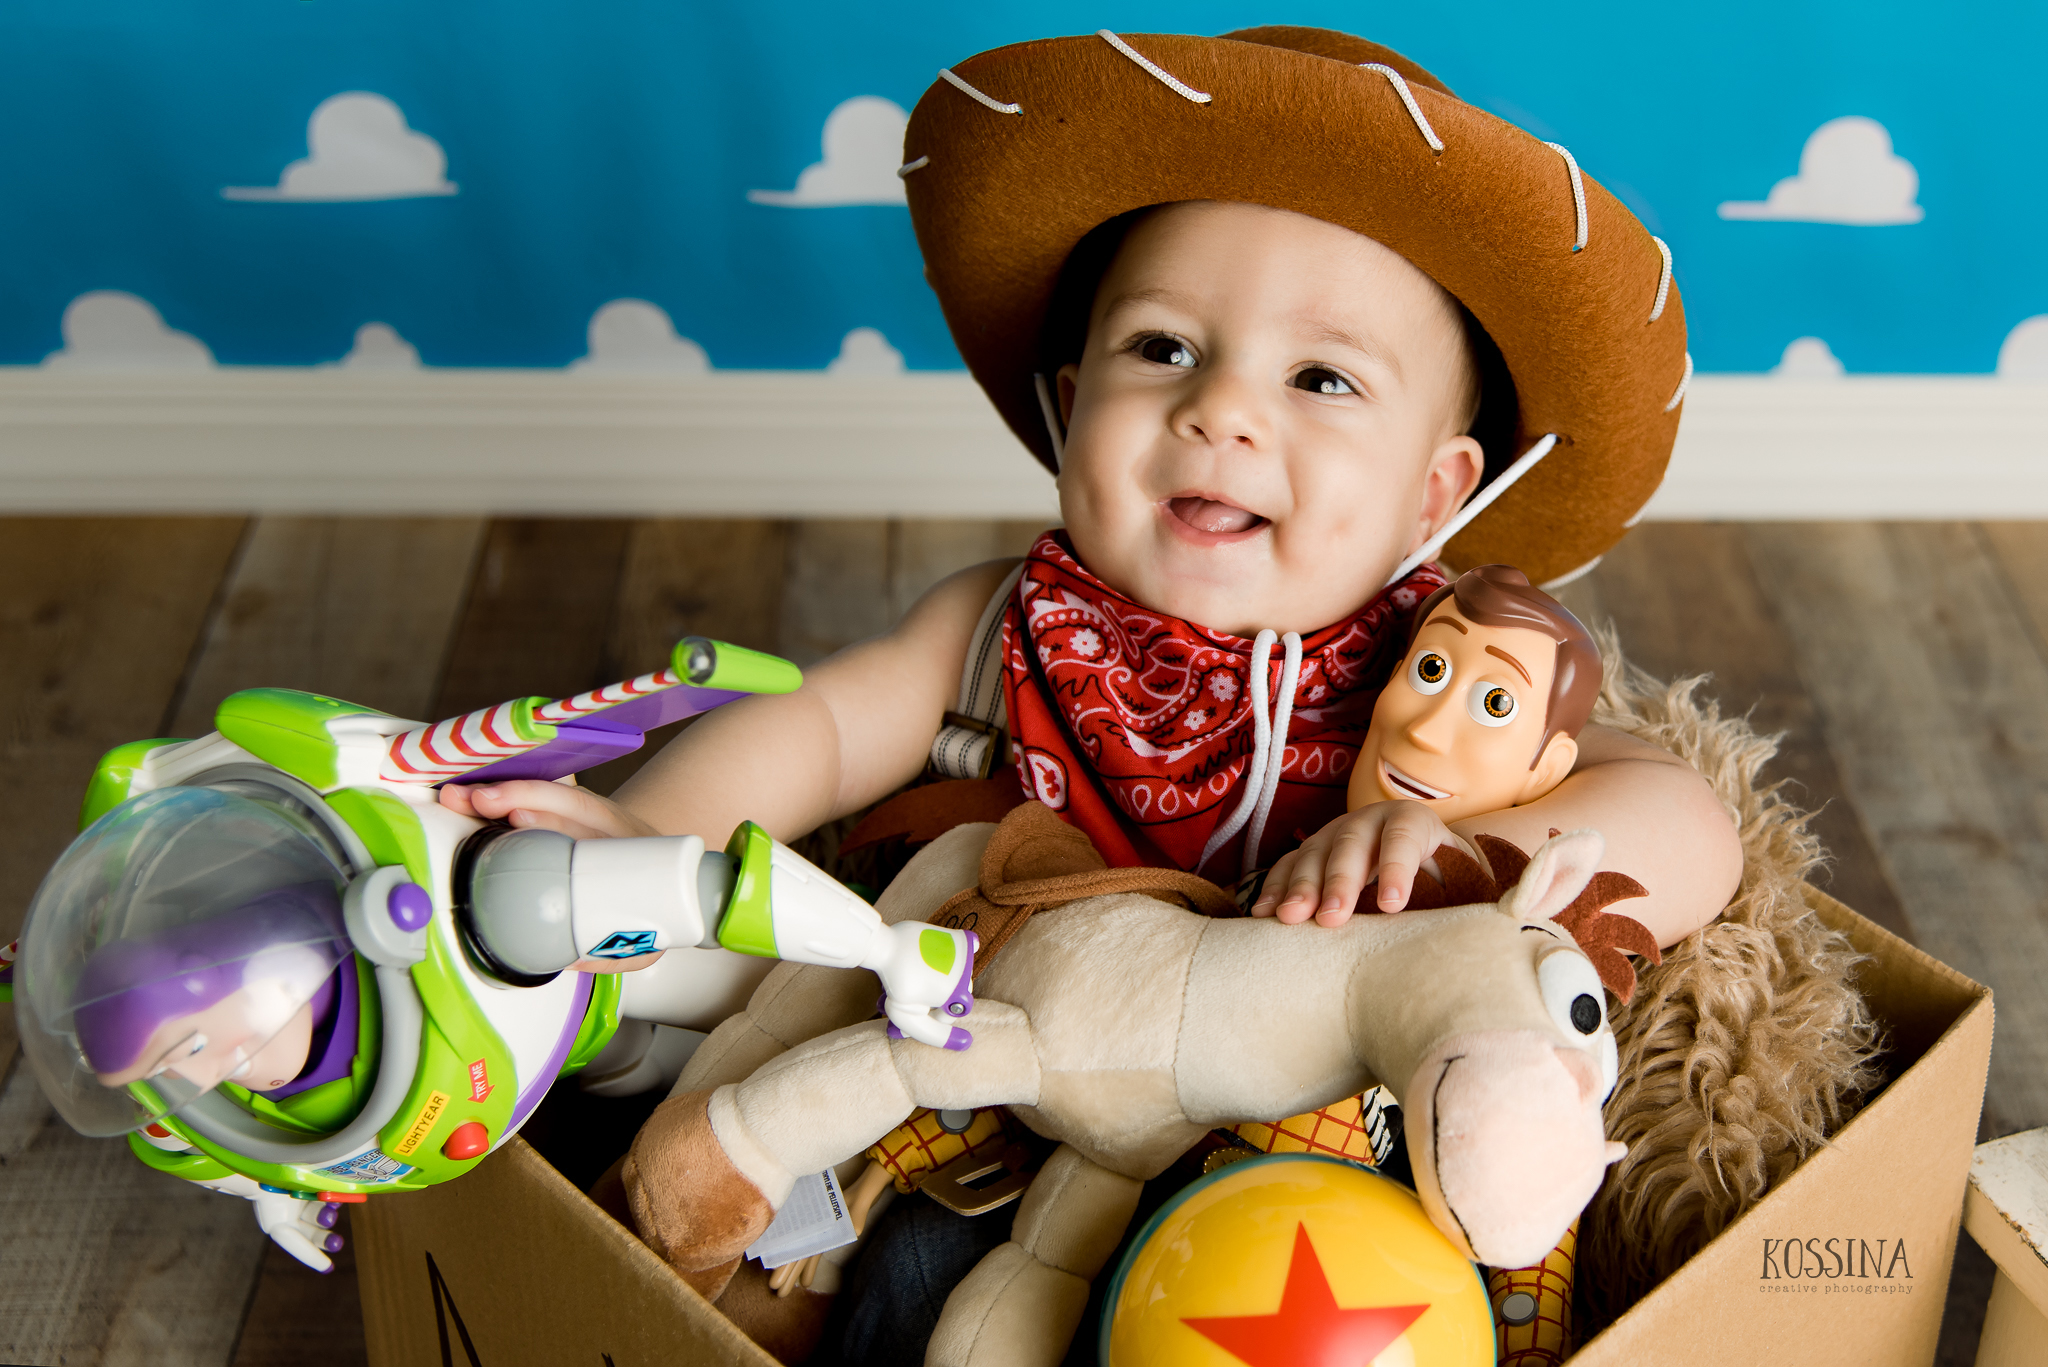 20+ Toy Story Party Ideas – The ULTIMATE Guide of crafts, recipes